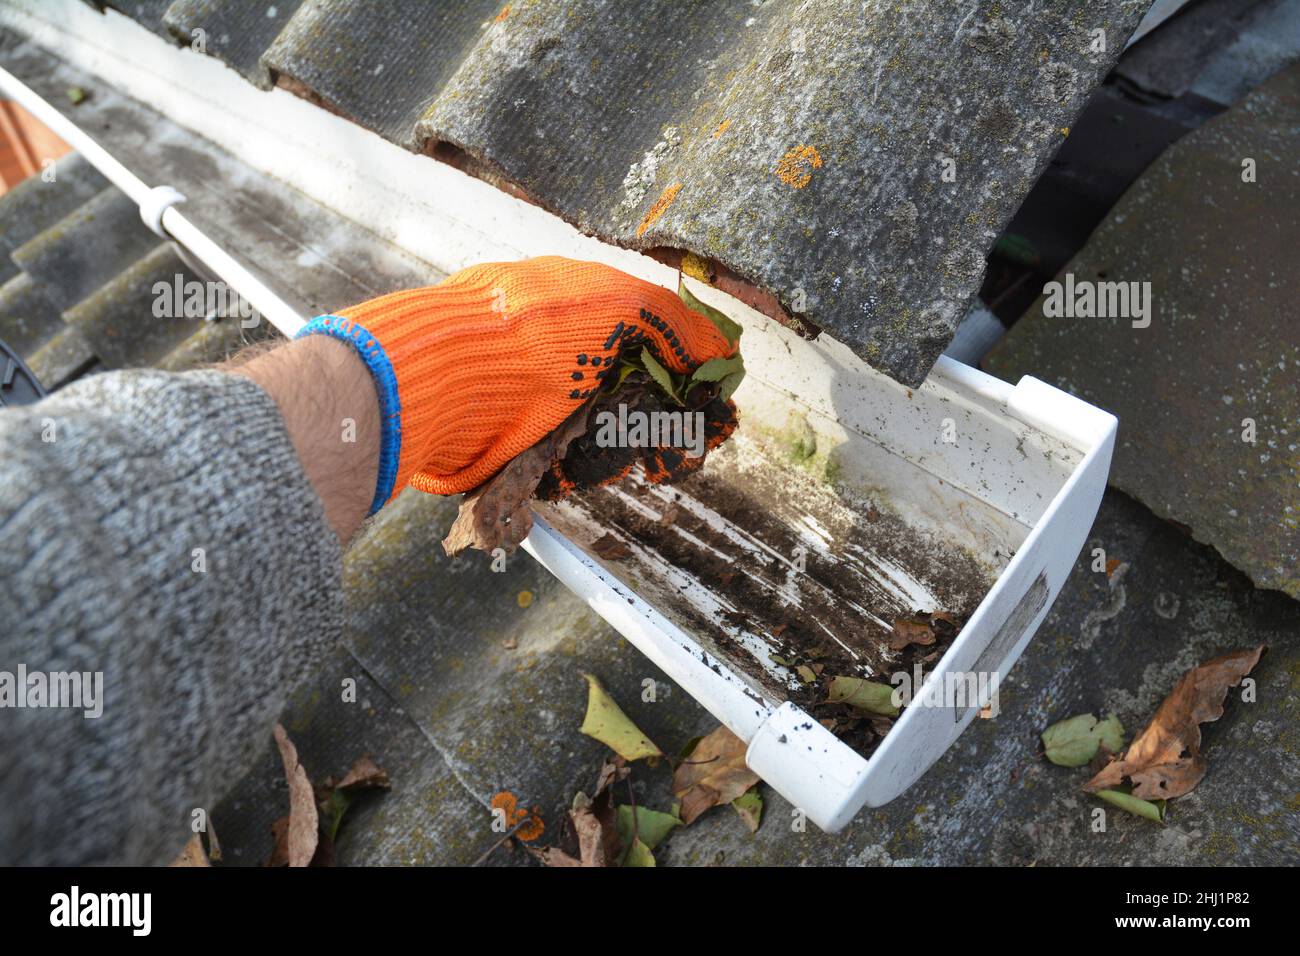 Rain Gutter Cleaning from Leaves in Autumn with hand.  Roof Gutter Cleaning Tips. Clean Your Gutters Before They Clean Out Your Wallet. Step by Step. Stock Photo